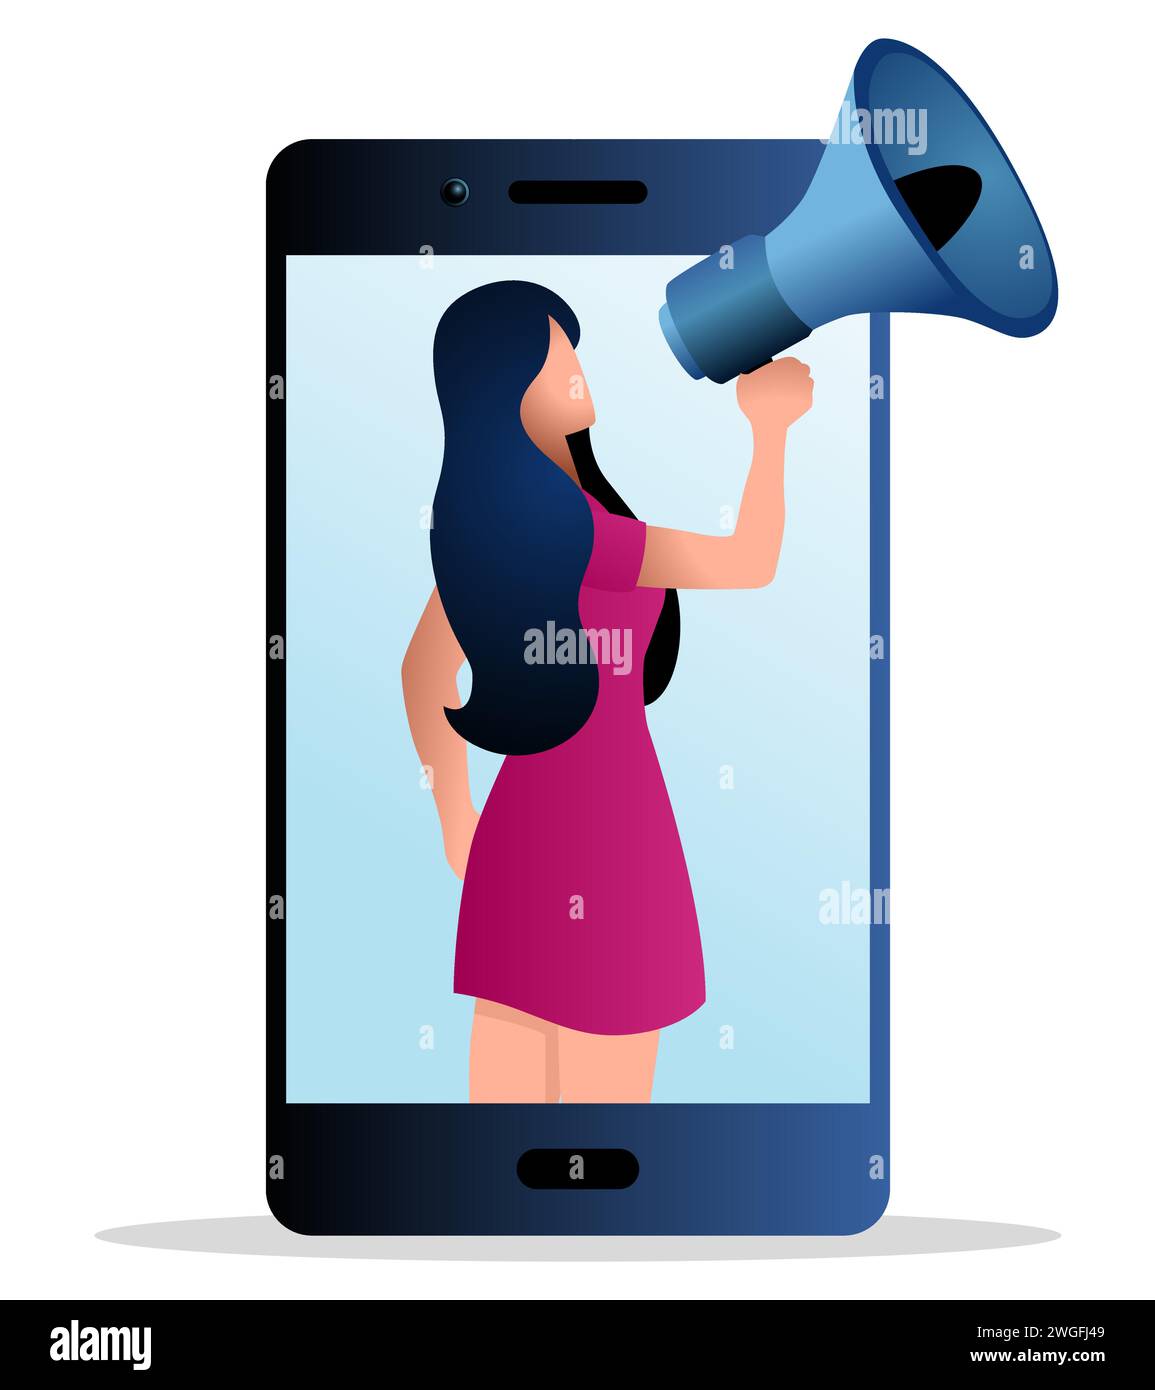 Female figure comes out from cellphone using megaphone, influencer, beauty flogger, self promotion on social media, vector illustration Stock Vector